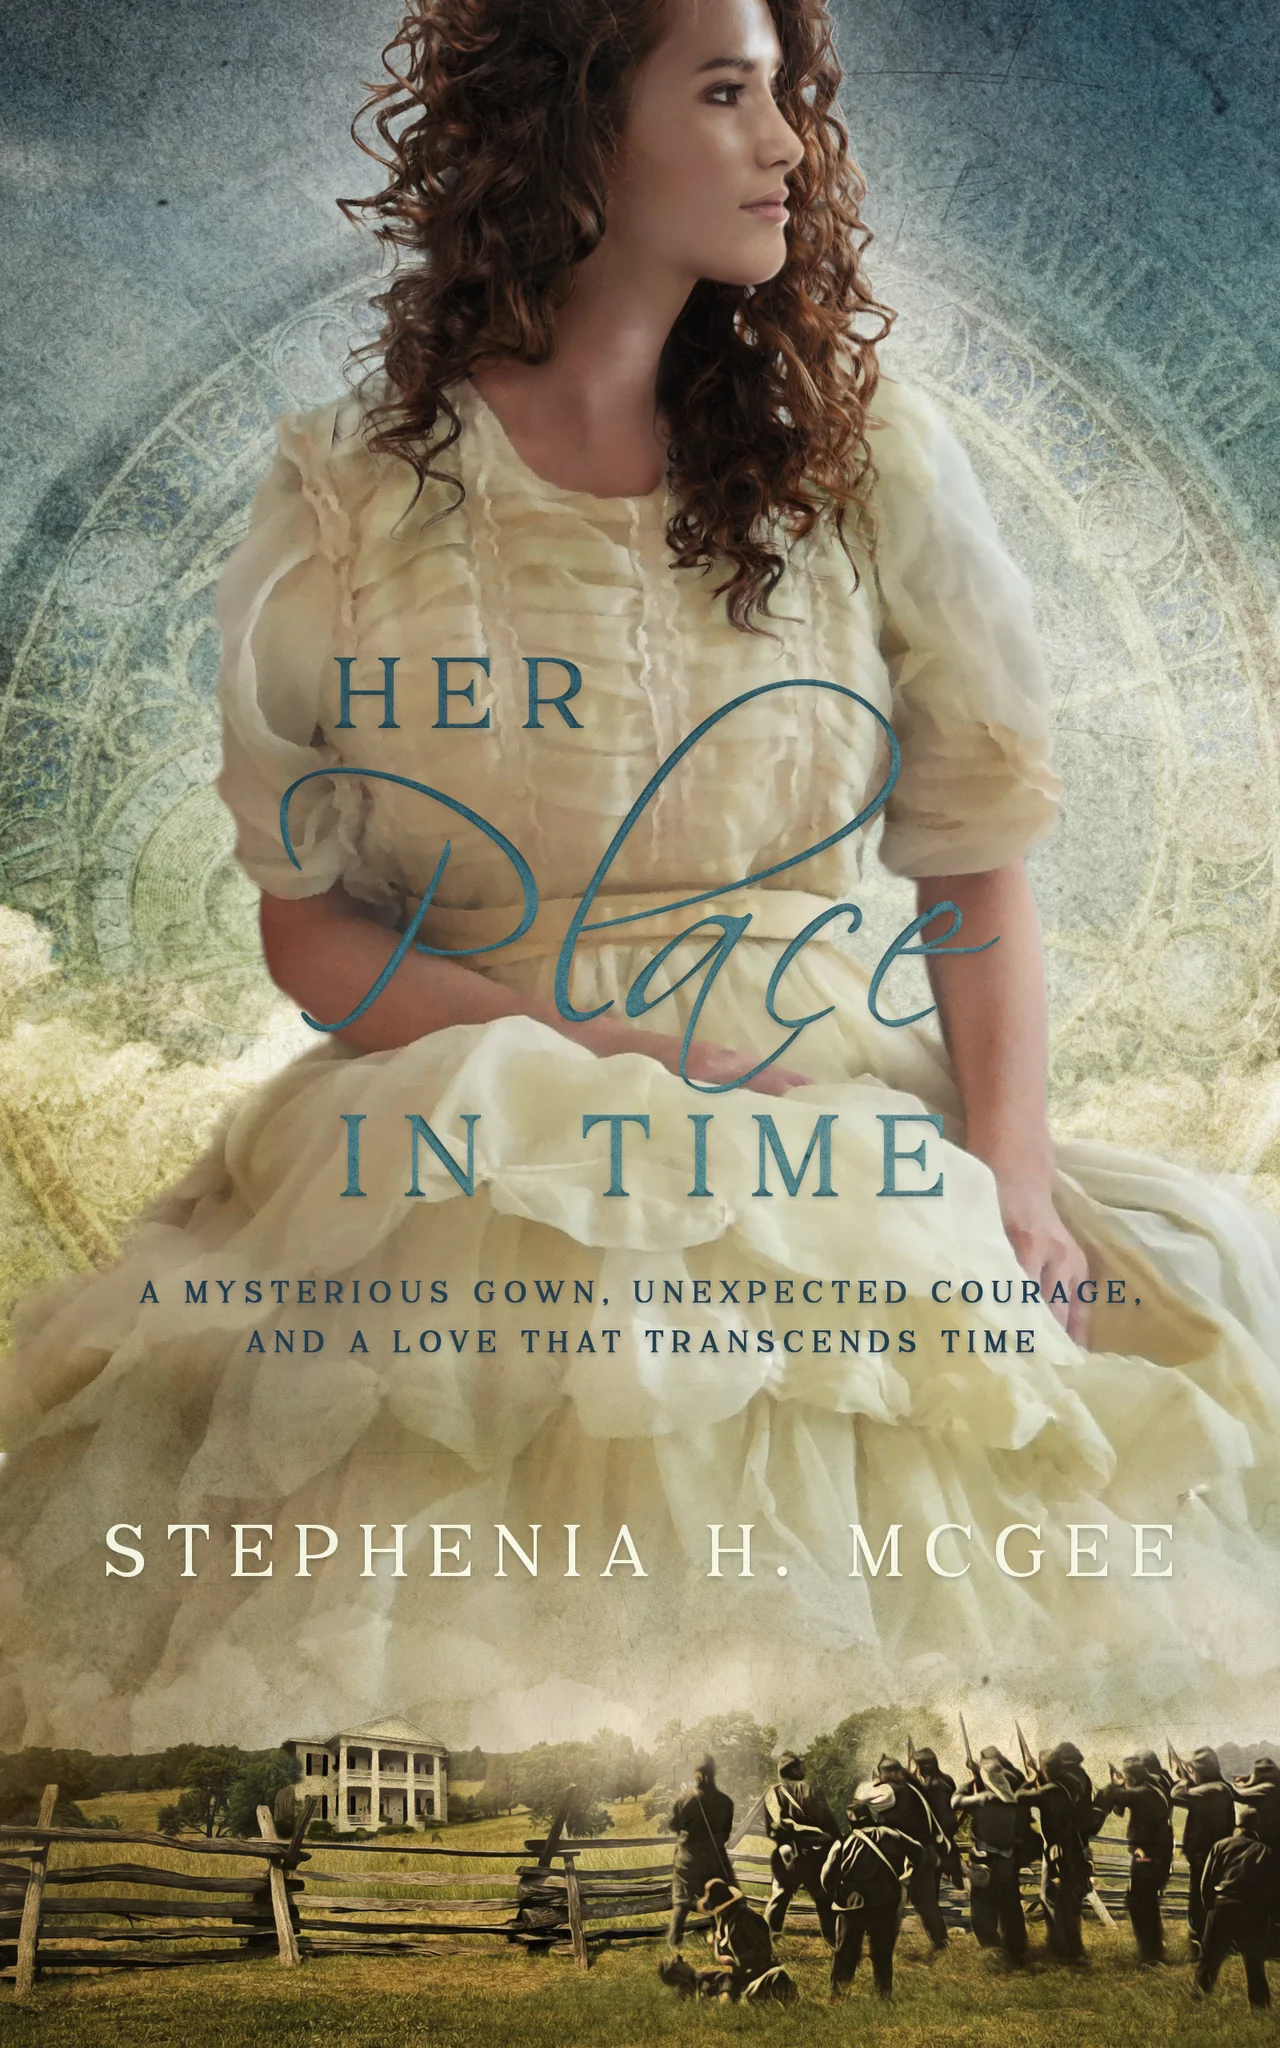 Featured image for “Her Place in Time”